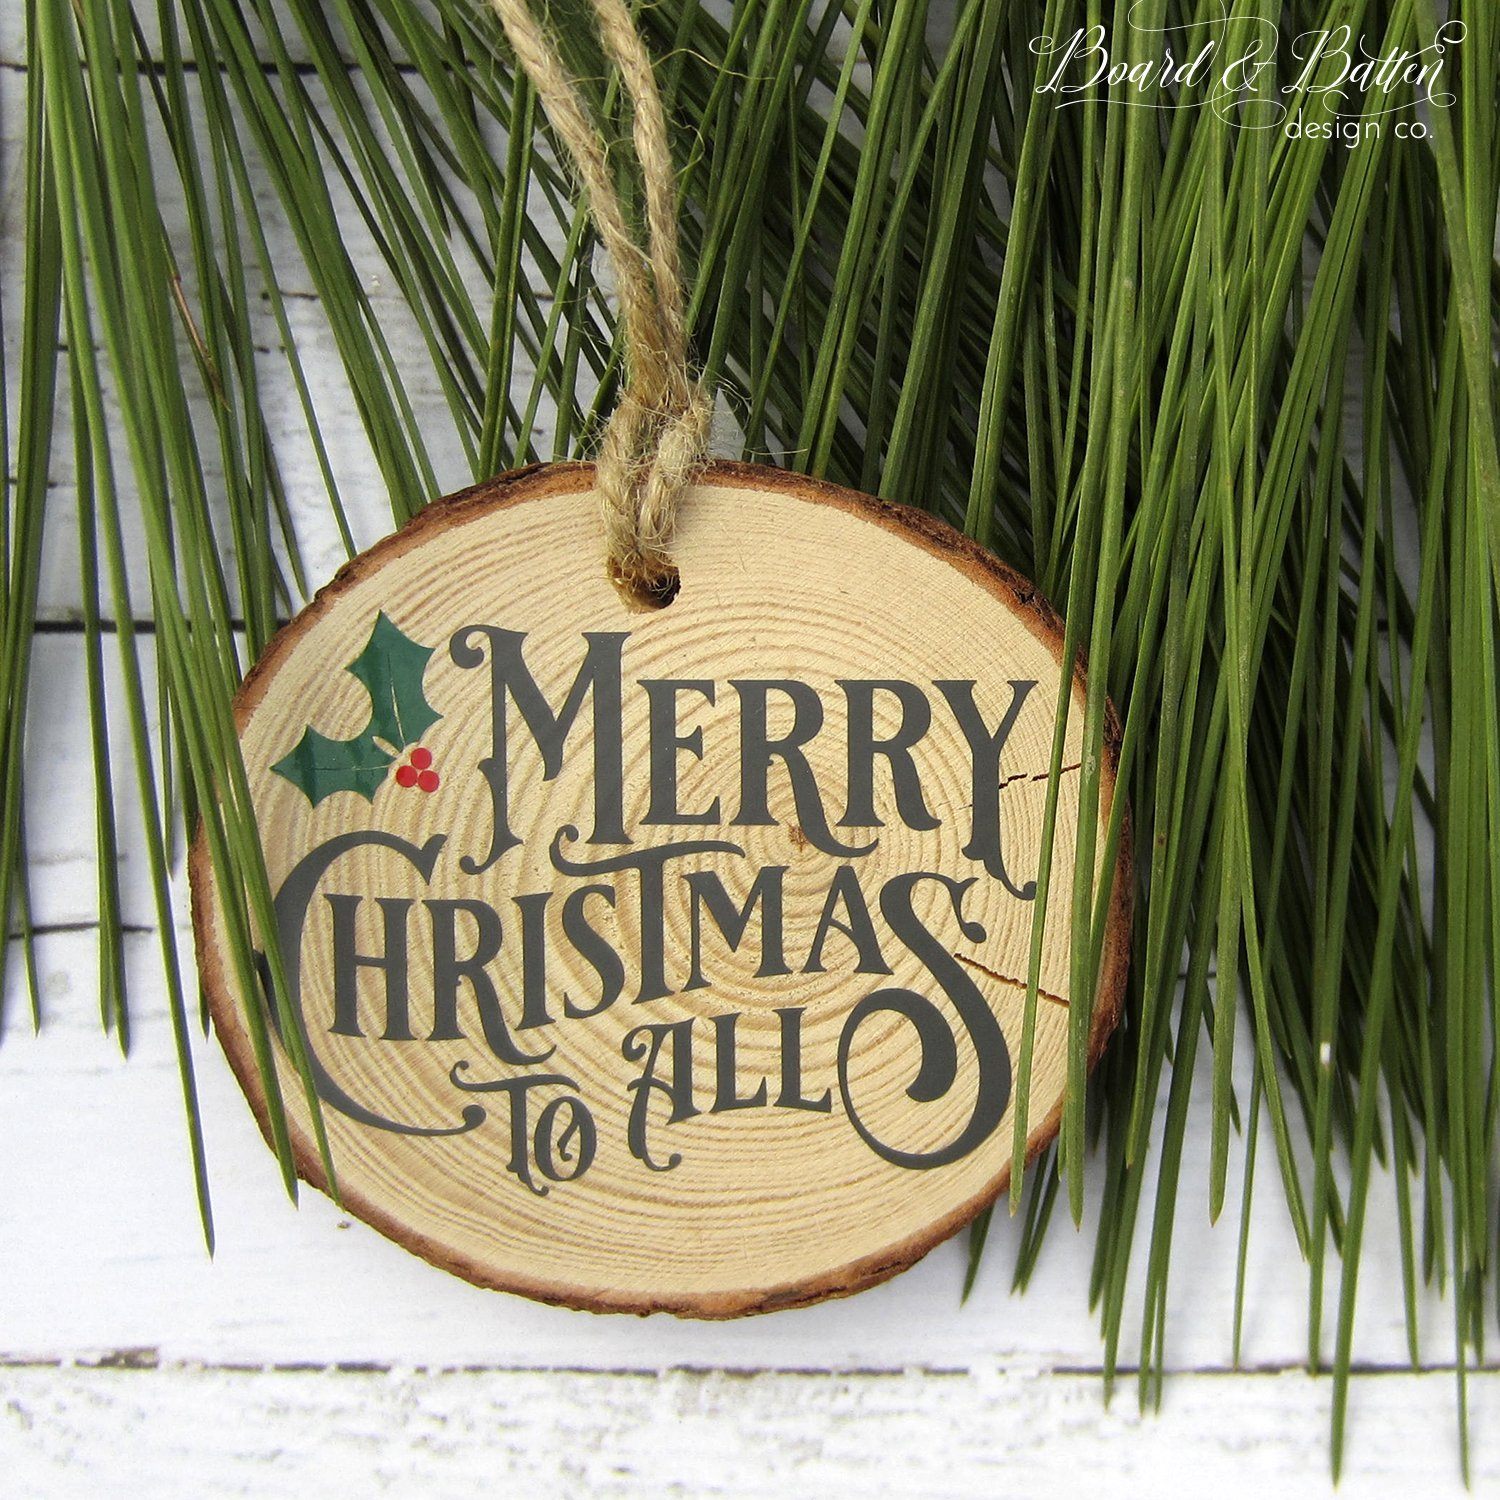 Download Merry Christmas To All Vintage Christmas Svg File Board Batten Design Co